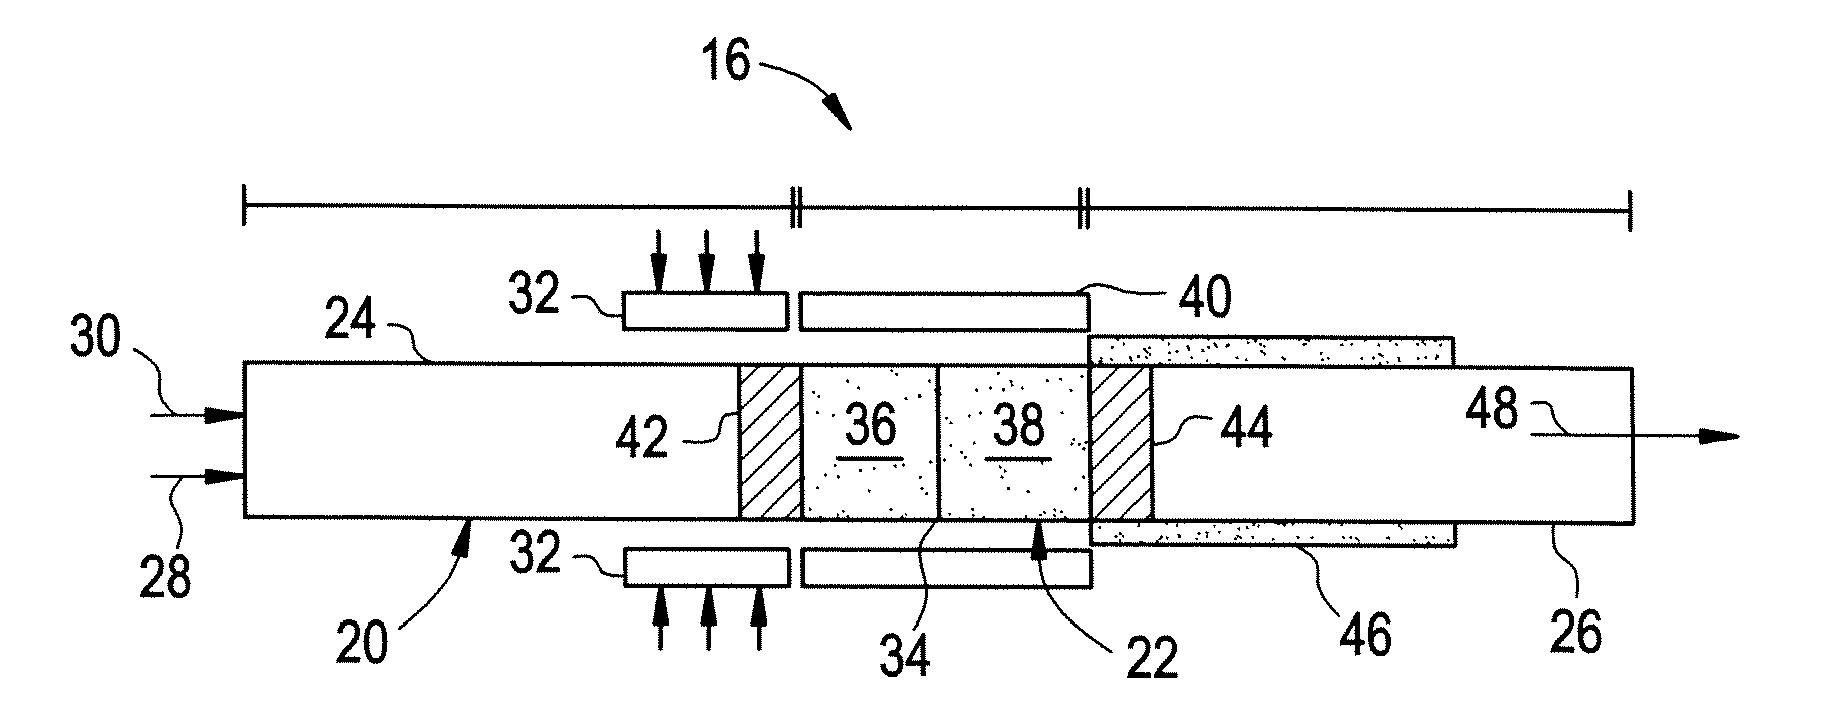 Catalytic partial oxidation processor with heat exchanger for converting hydrocarbon fuels to syngas for use in fuel cells and method